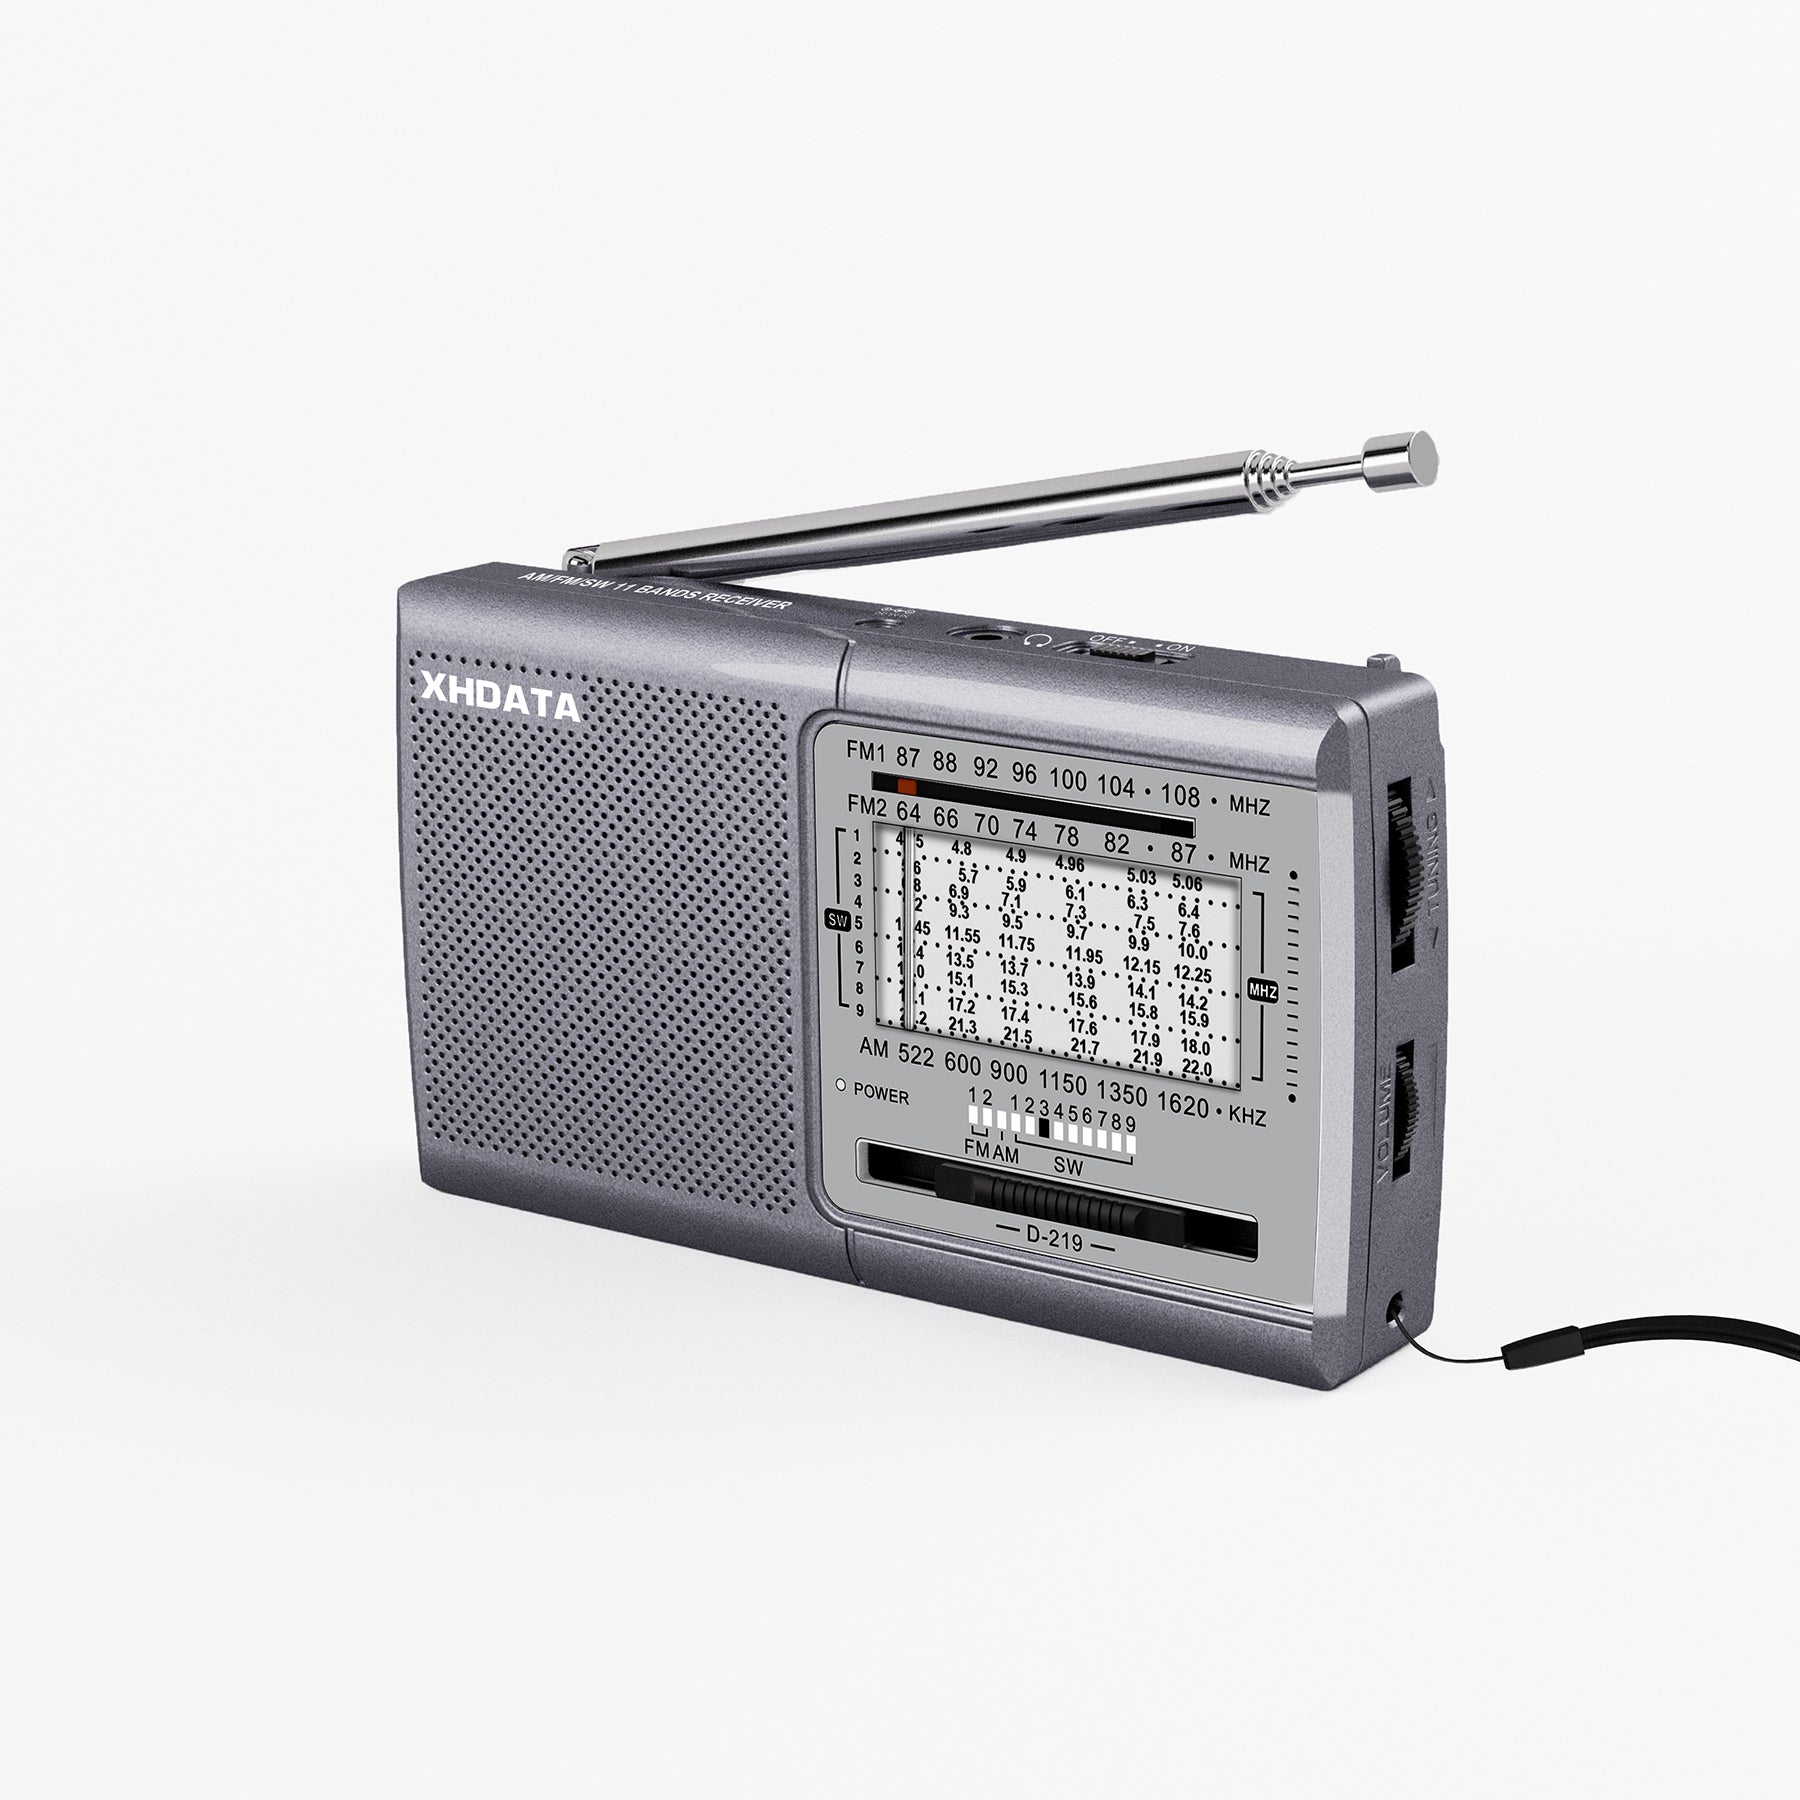 How to Choose a Best Portable Radio for you? – XHDATA